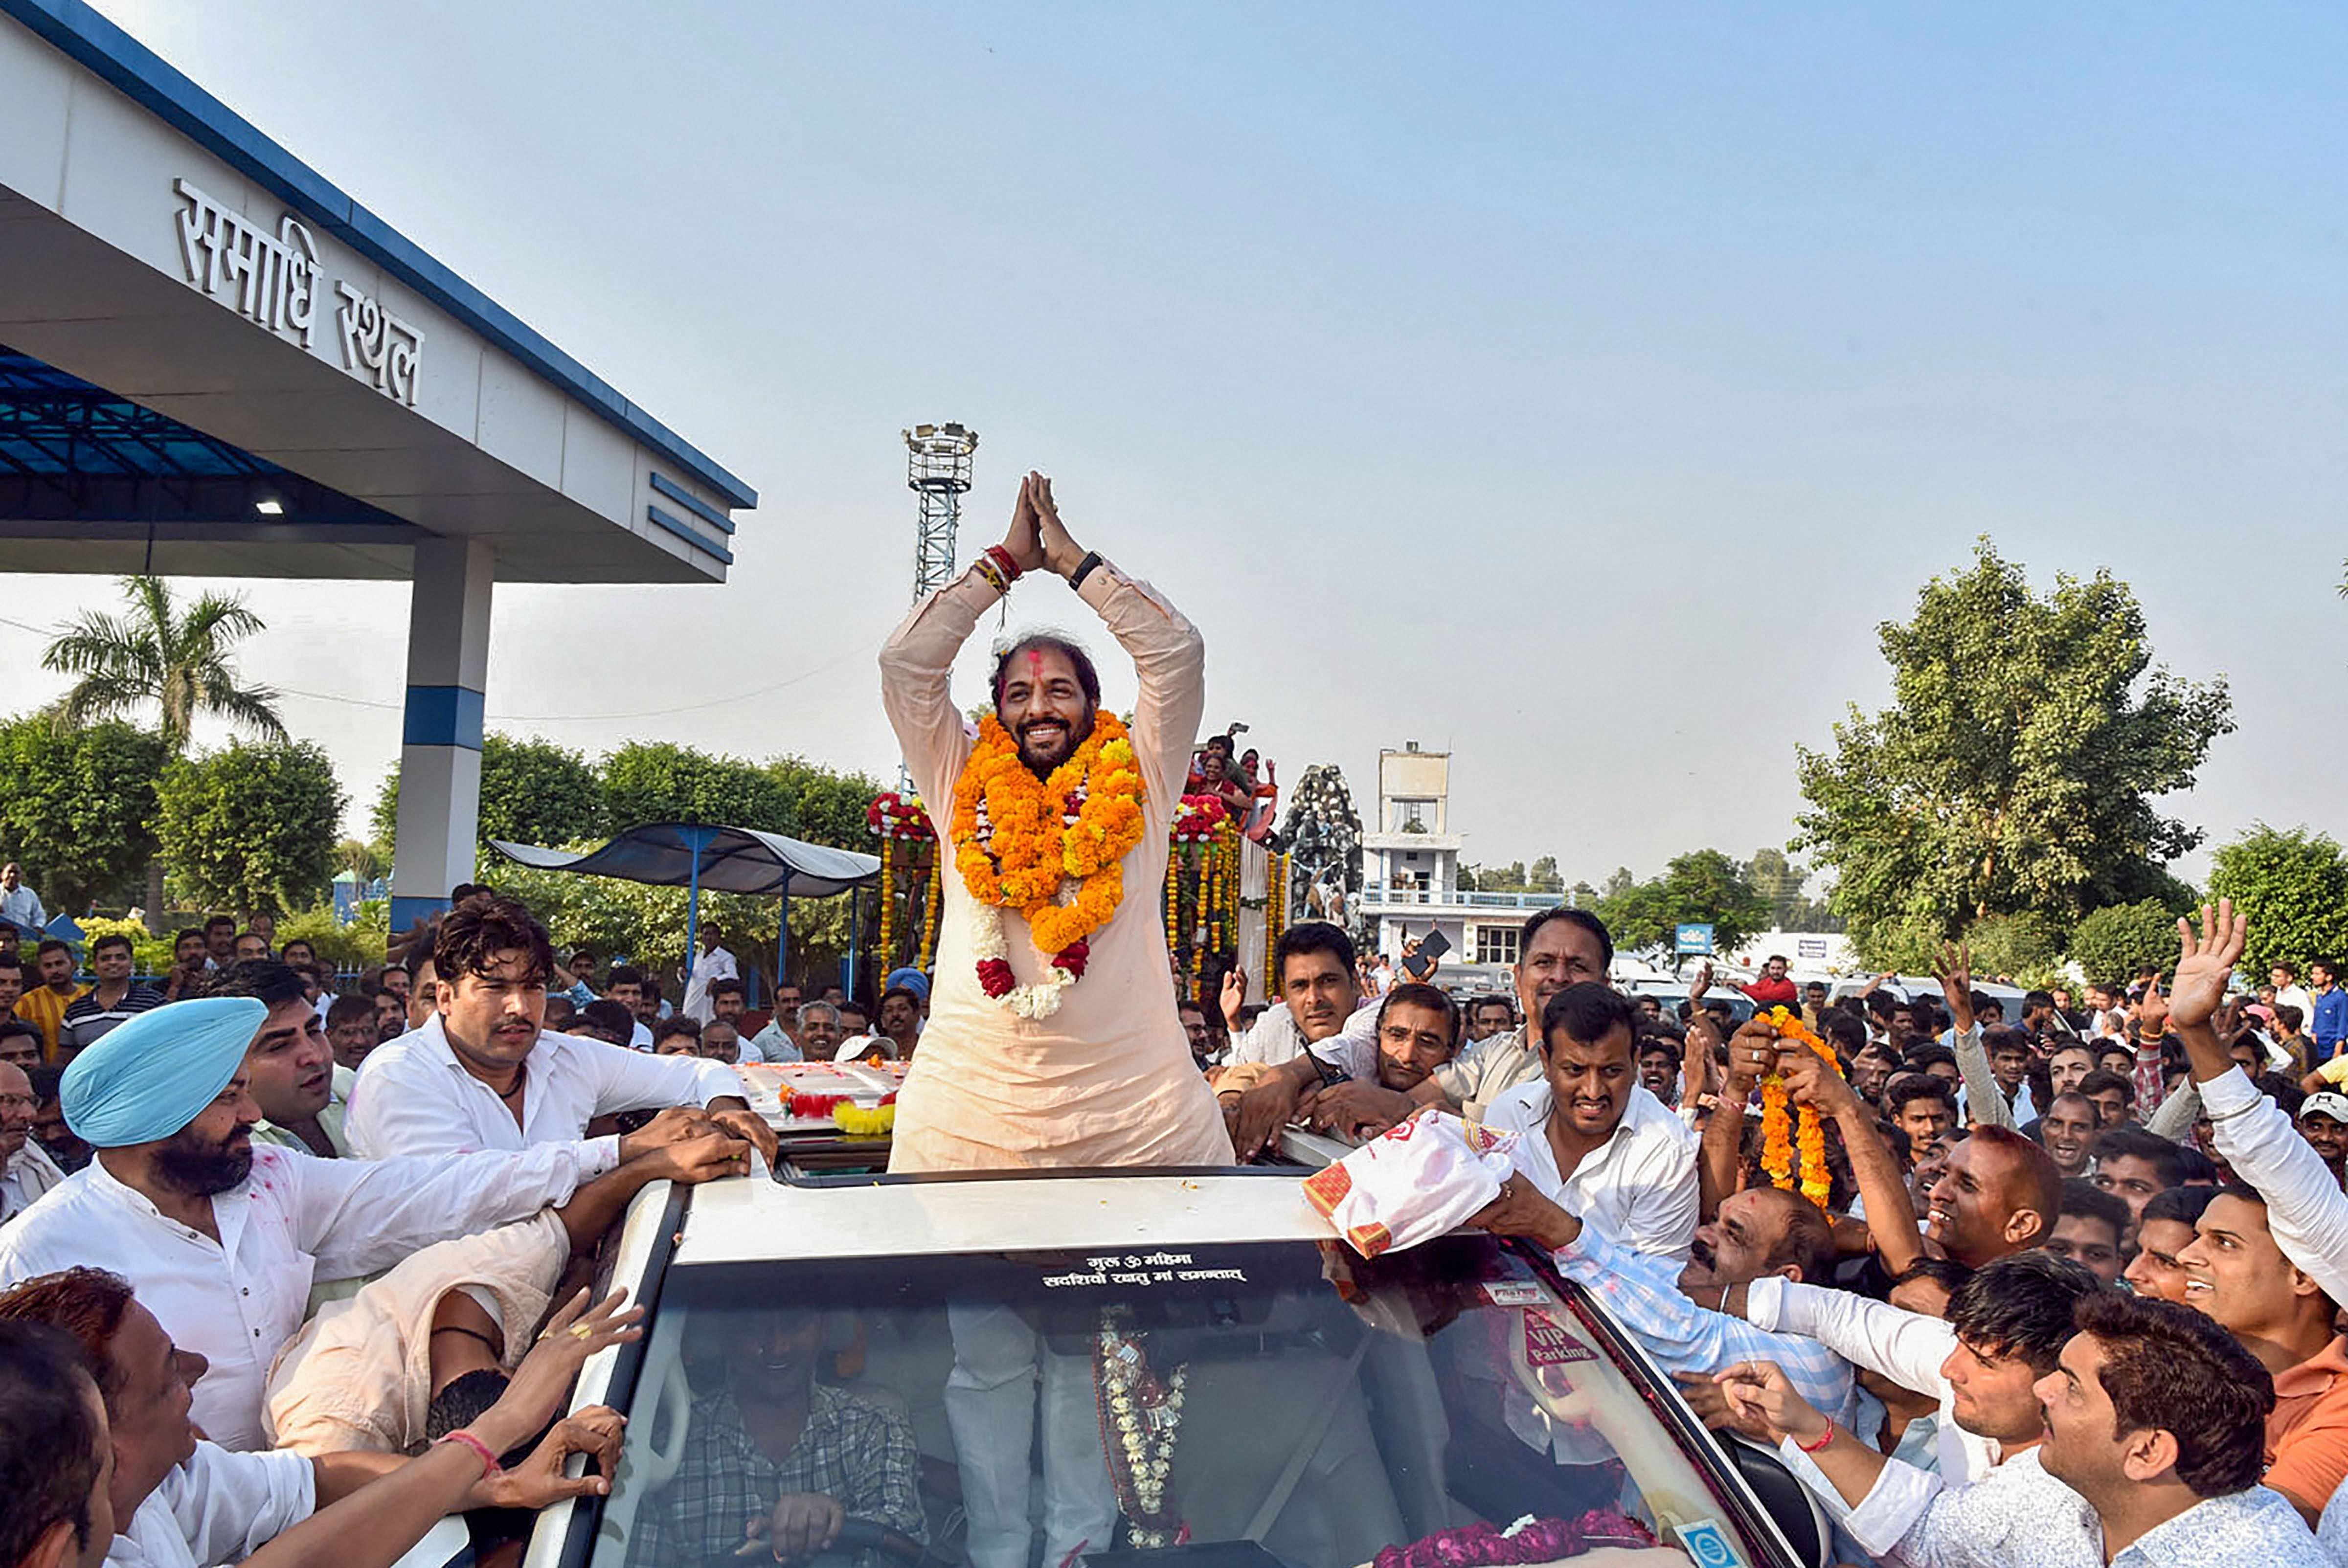 Haryana Lokhit Party leader Gopal Kanda during a roadshow after his victory in Assembly elections, in Sirsa district. (PTI Photo)